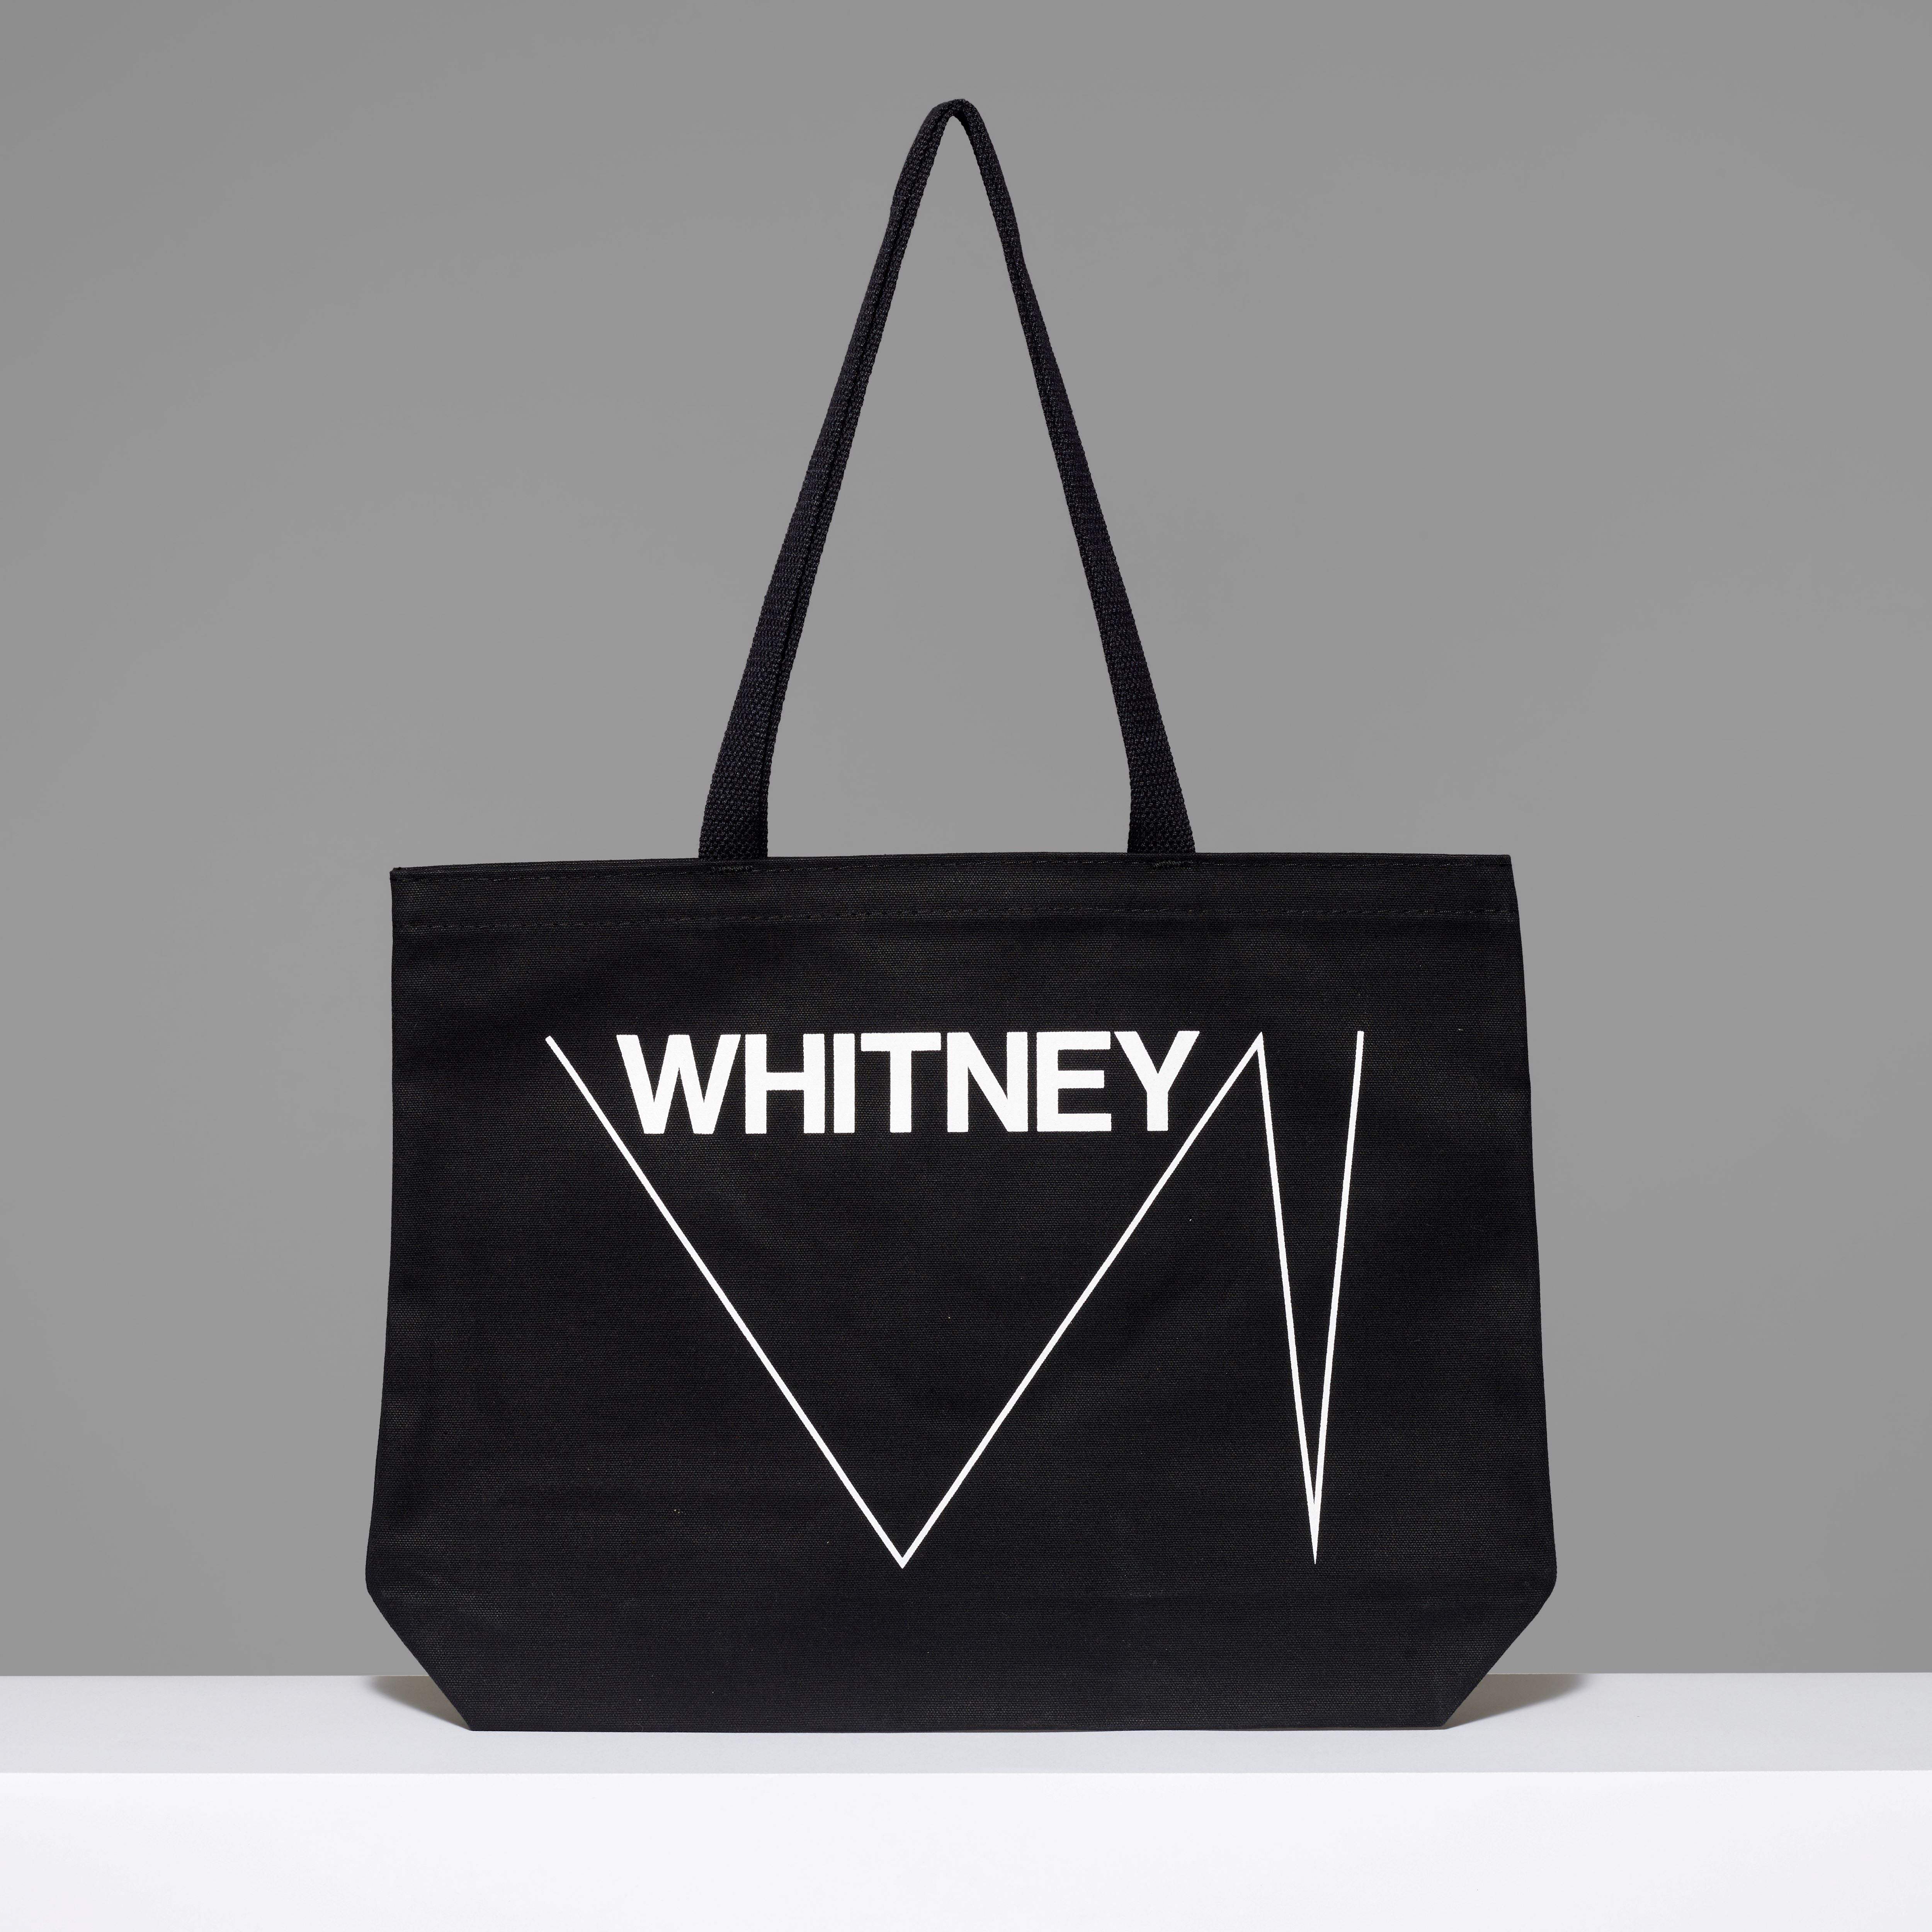 100% cotton black tote with the Whitney and logo text in white written across. Measures 18" x 14". 3.5" gusset, 11" handles.